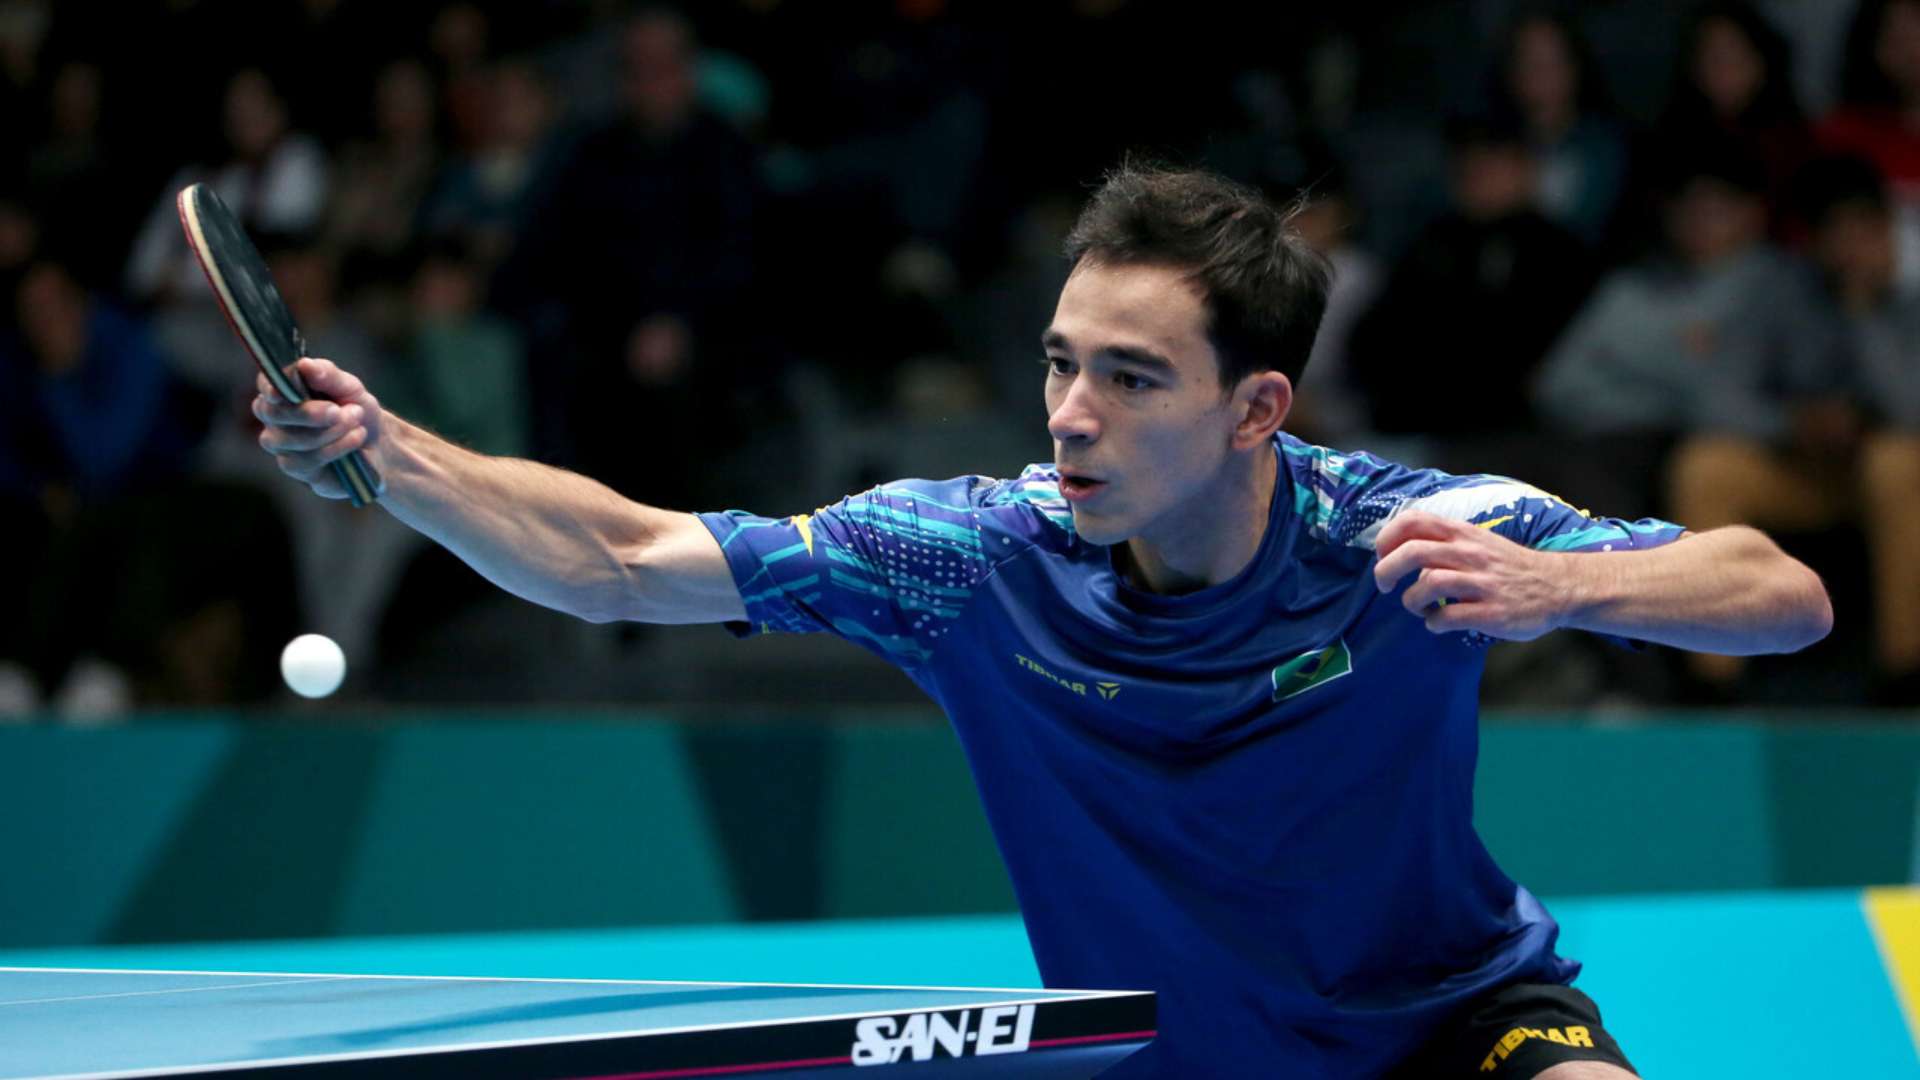 Table Tennis: Cuba and Brazil vie for the gold medal in male's singles